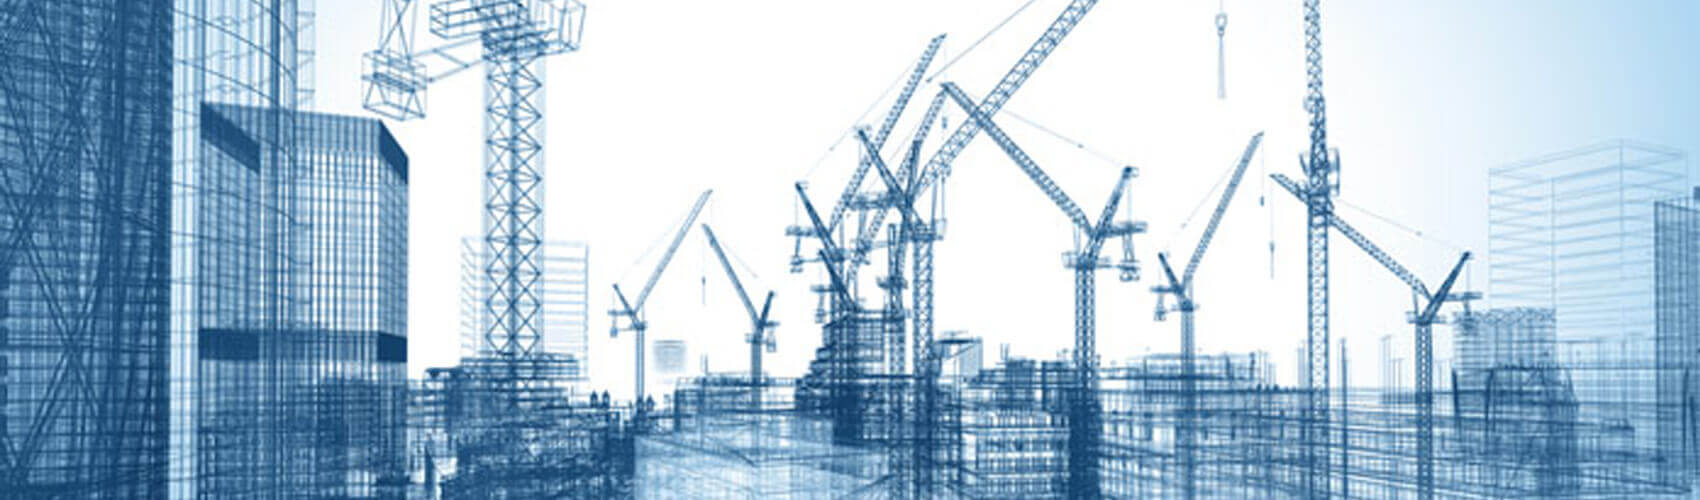 Transformation of the Construction Industry – An Outline